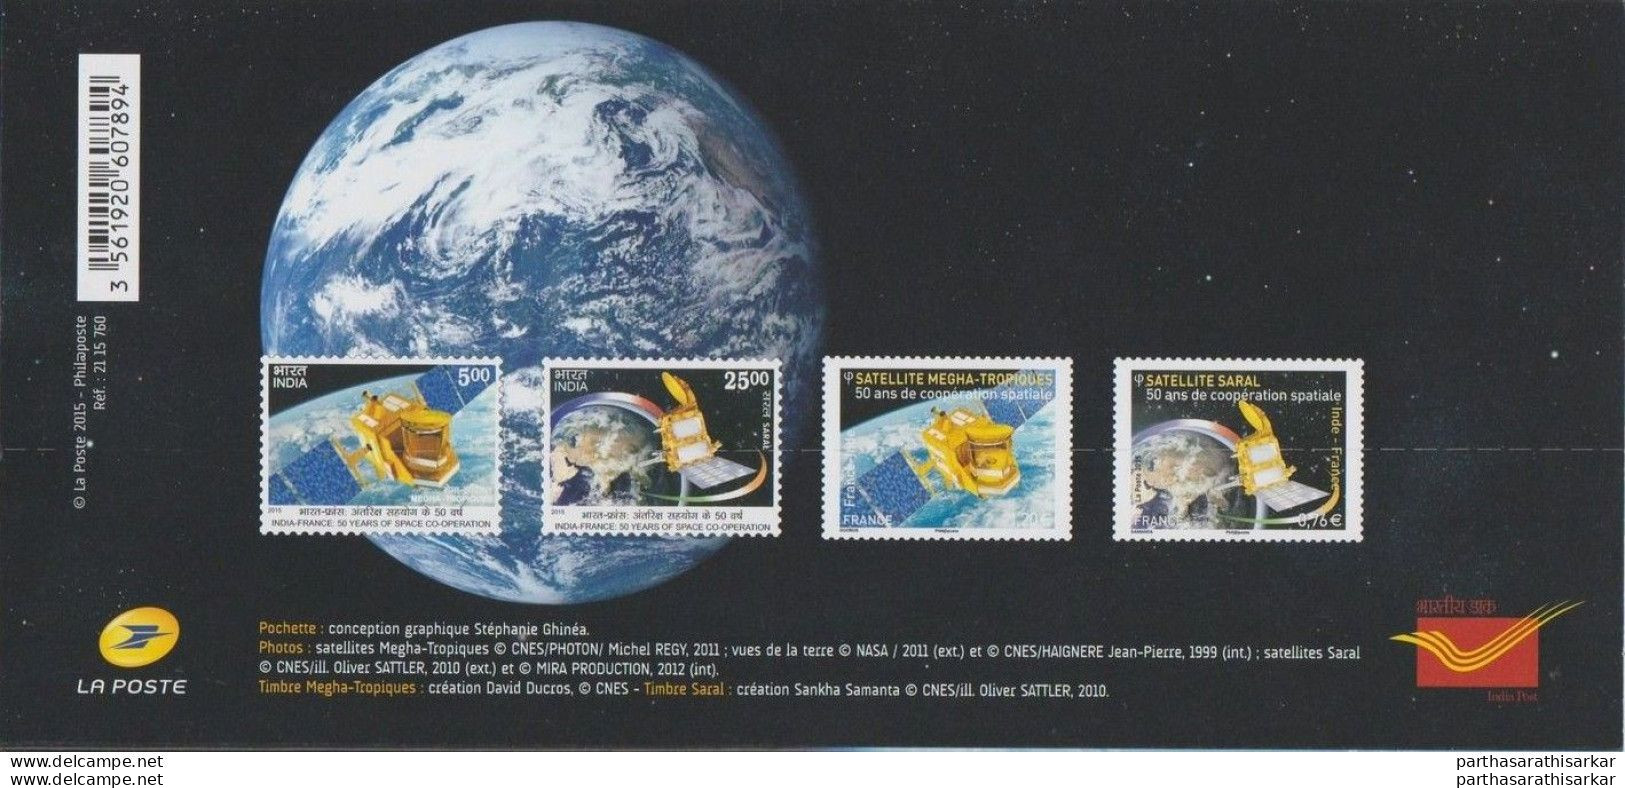 FRANCE 2015 JOINT ISSUE WITH INDIA SPACE PROGRAM OFFICIAL PRESENTATION PACK EXTREMELY RARE HARD TO FIND MNH - 2013-2018 Marianne Di Ciappa-Kawena